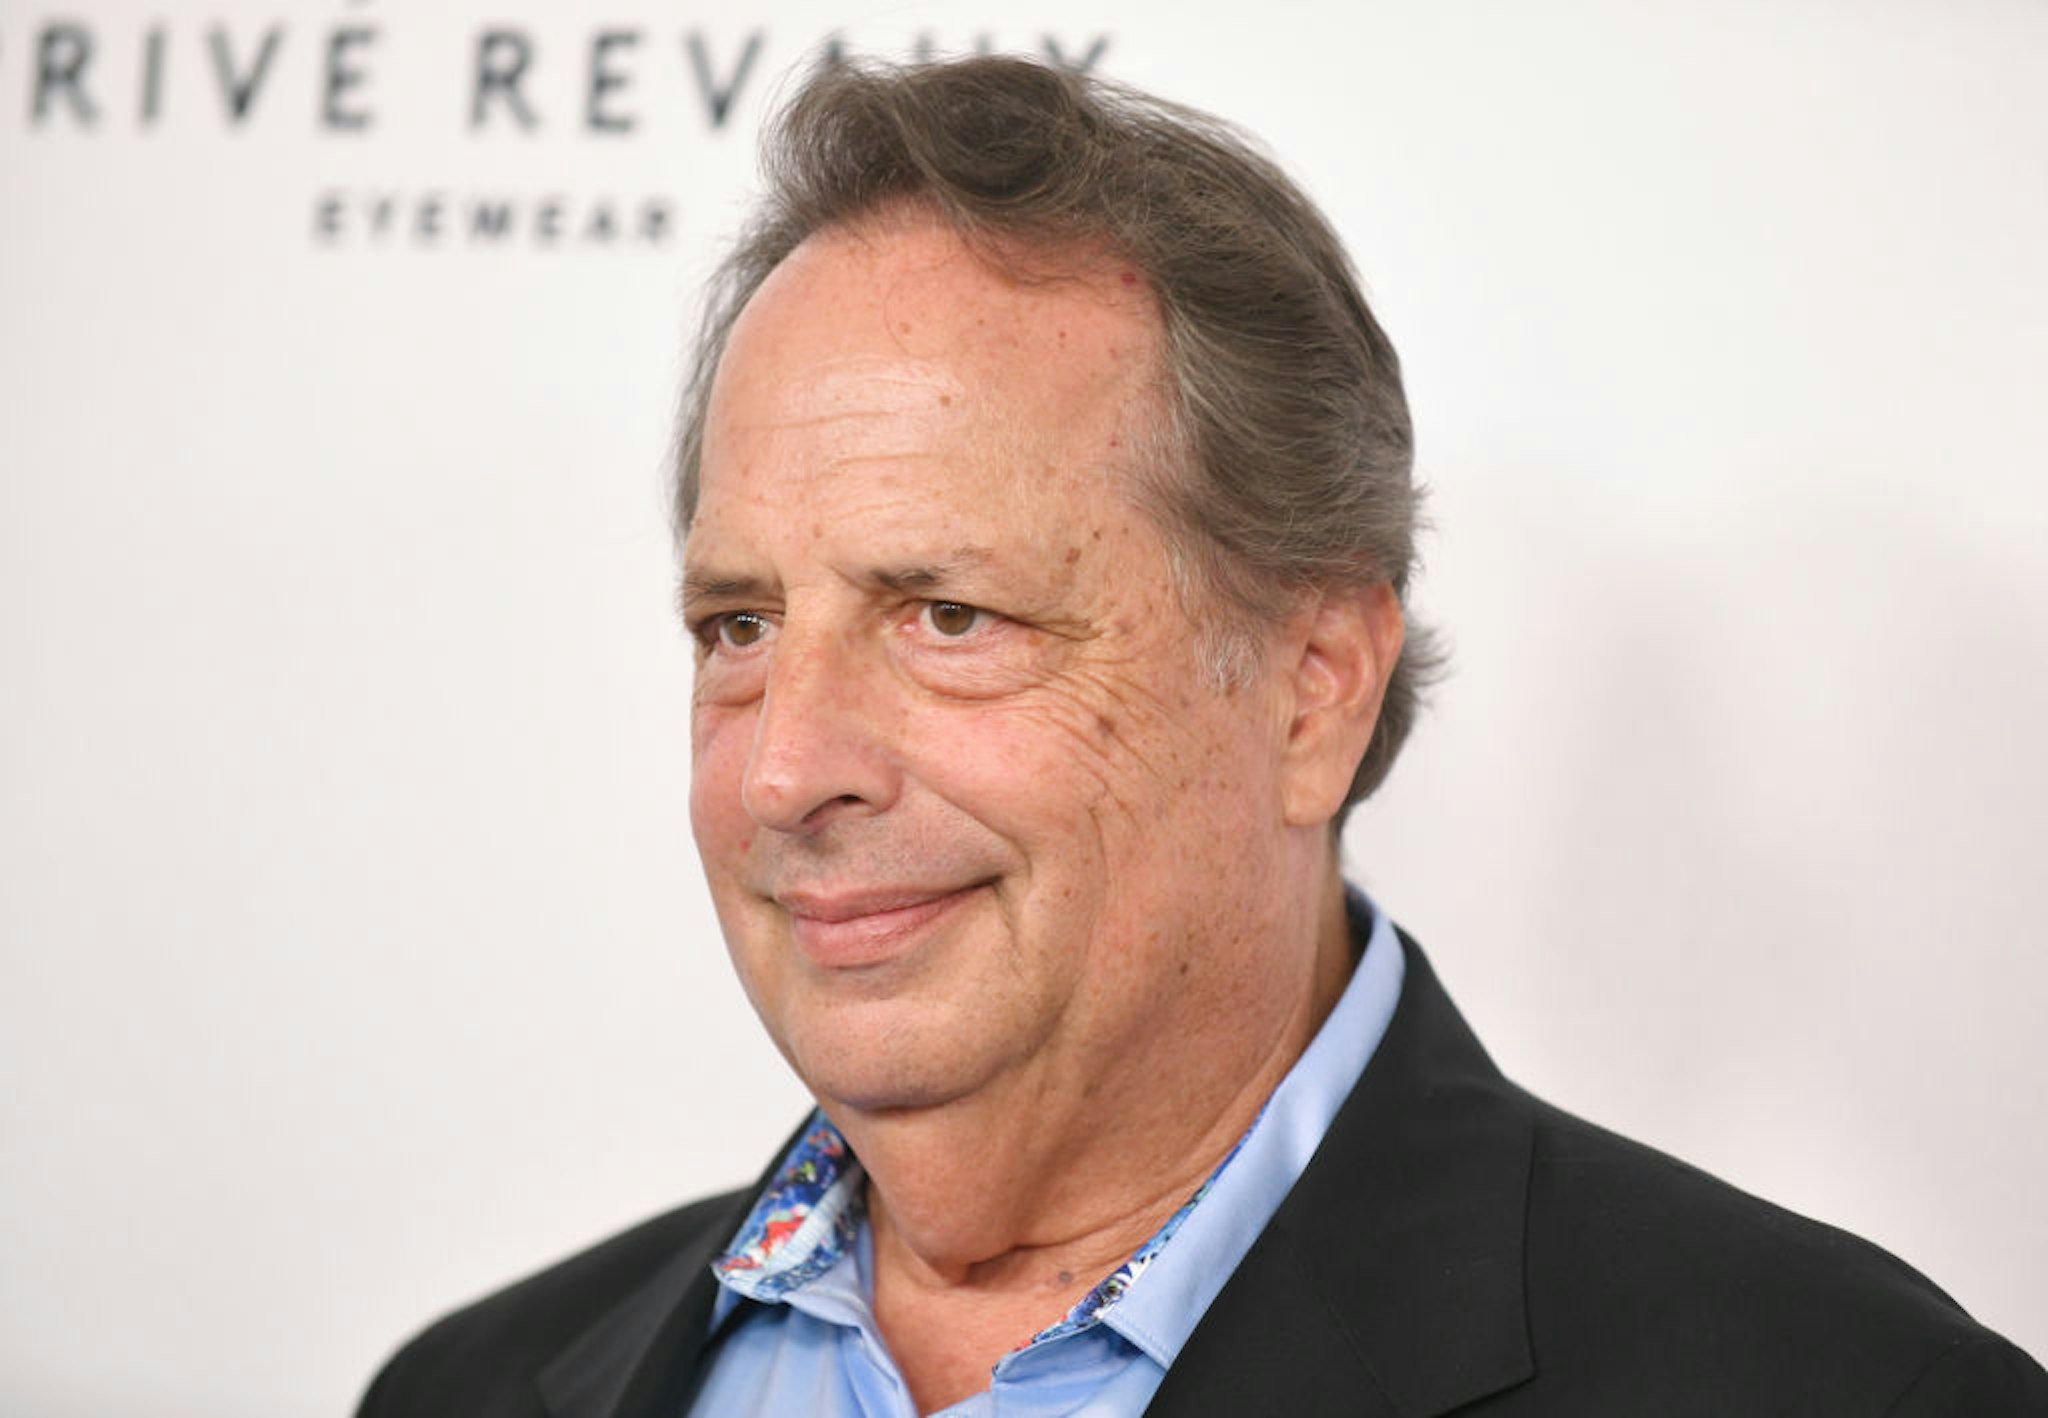 BEVERLY HILLS, CALIFORNIA - AUGUST 19: Jon Lovitz attends the 2022 Harold and Carole Pump Foundation Gala at The Beverly Hilton on August 19, 2022 in Beverly Hills, California. (Photo by Rodin Eckenroth/Getty Images)